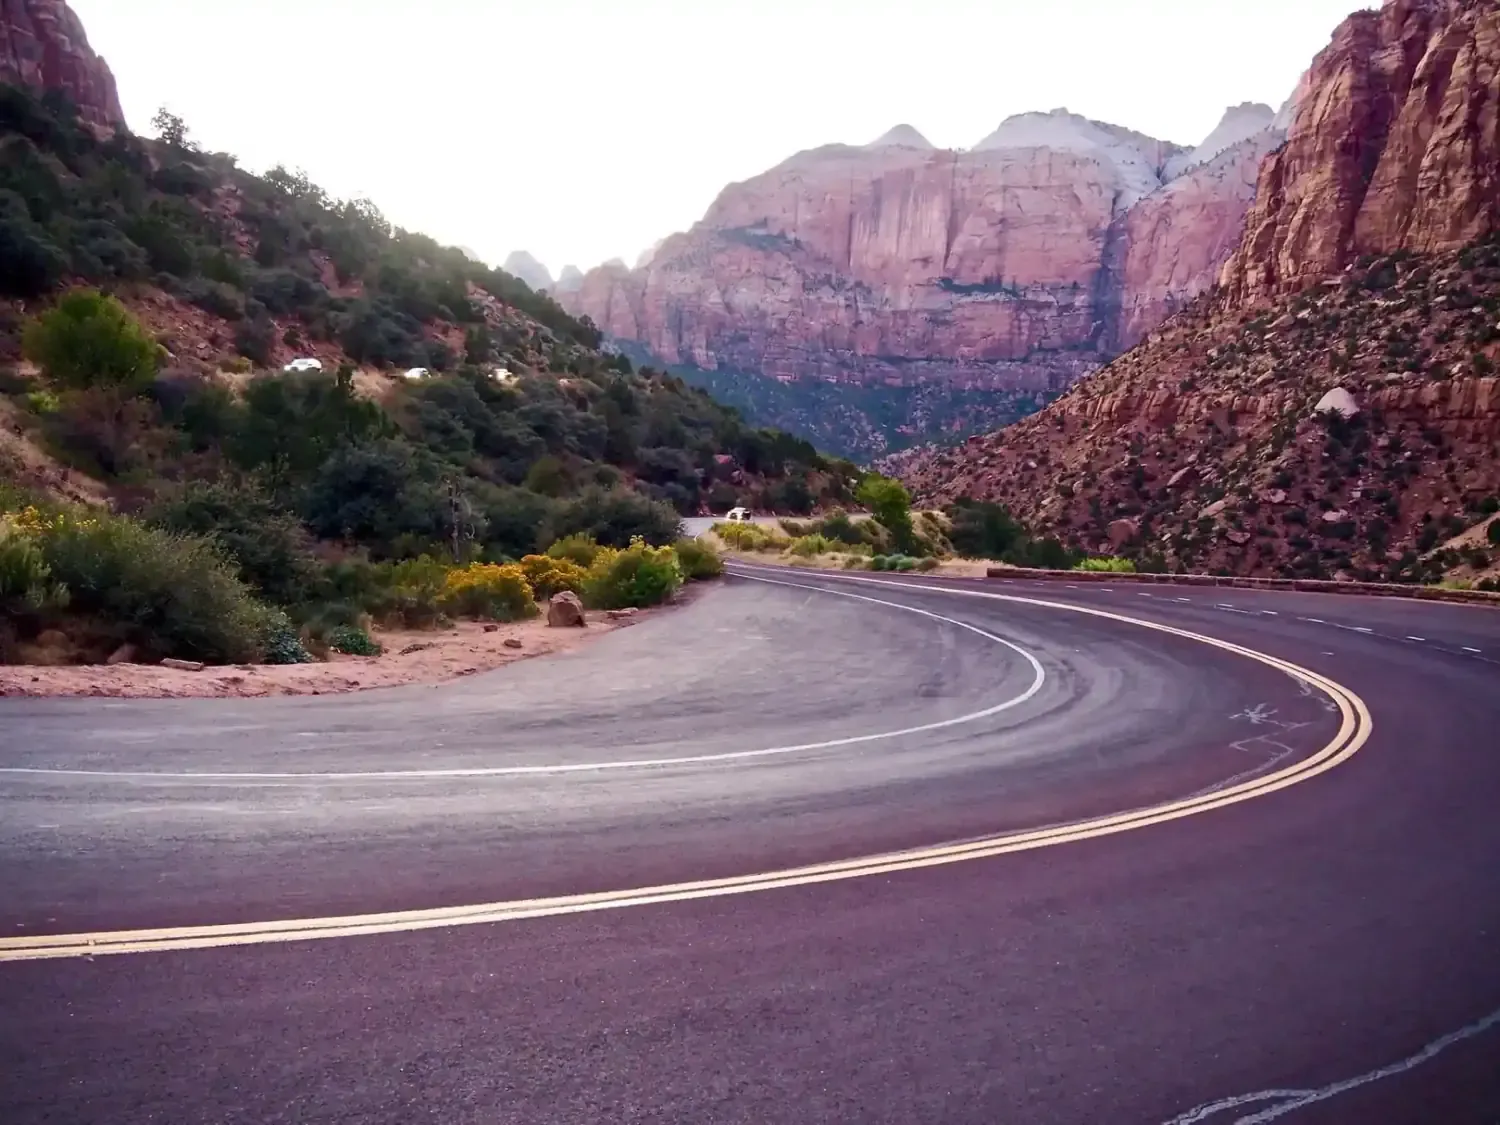 The road sweeps through Zion canyon